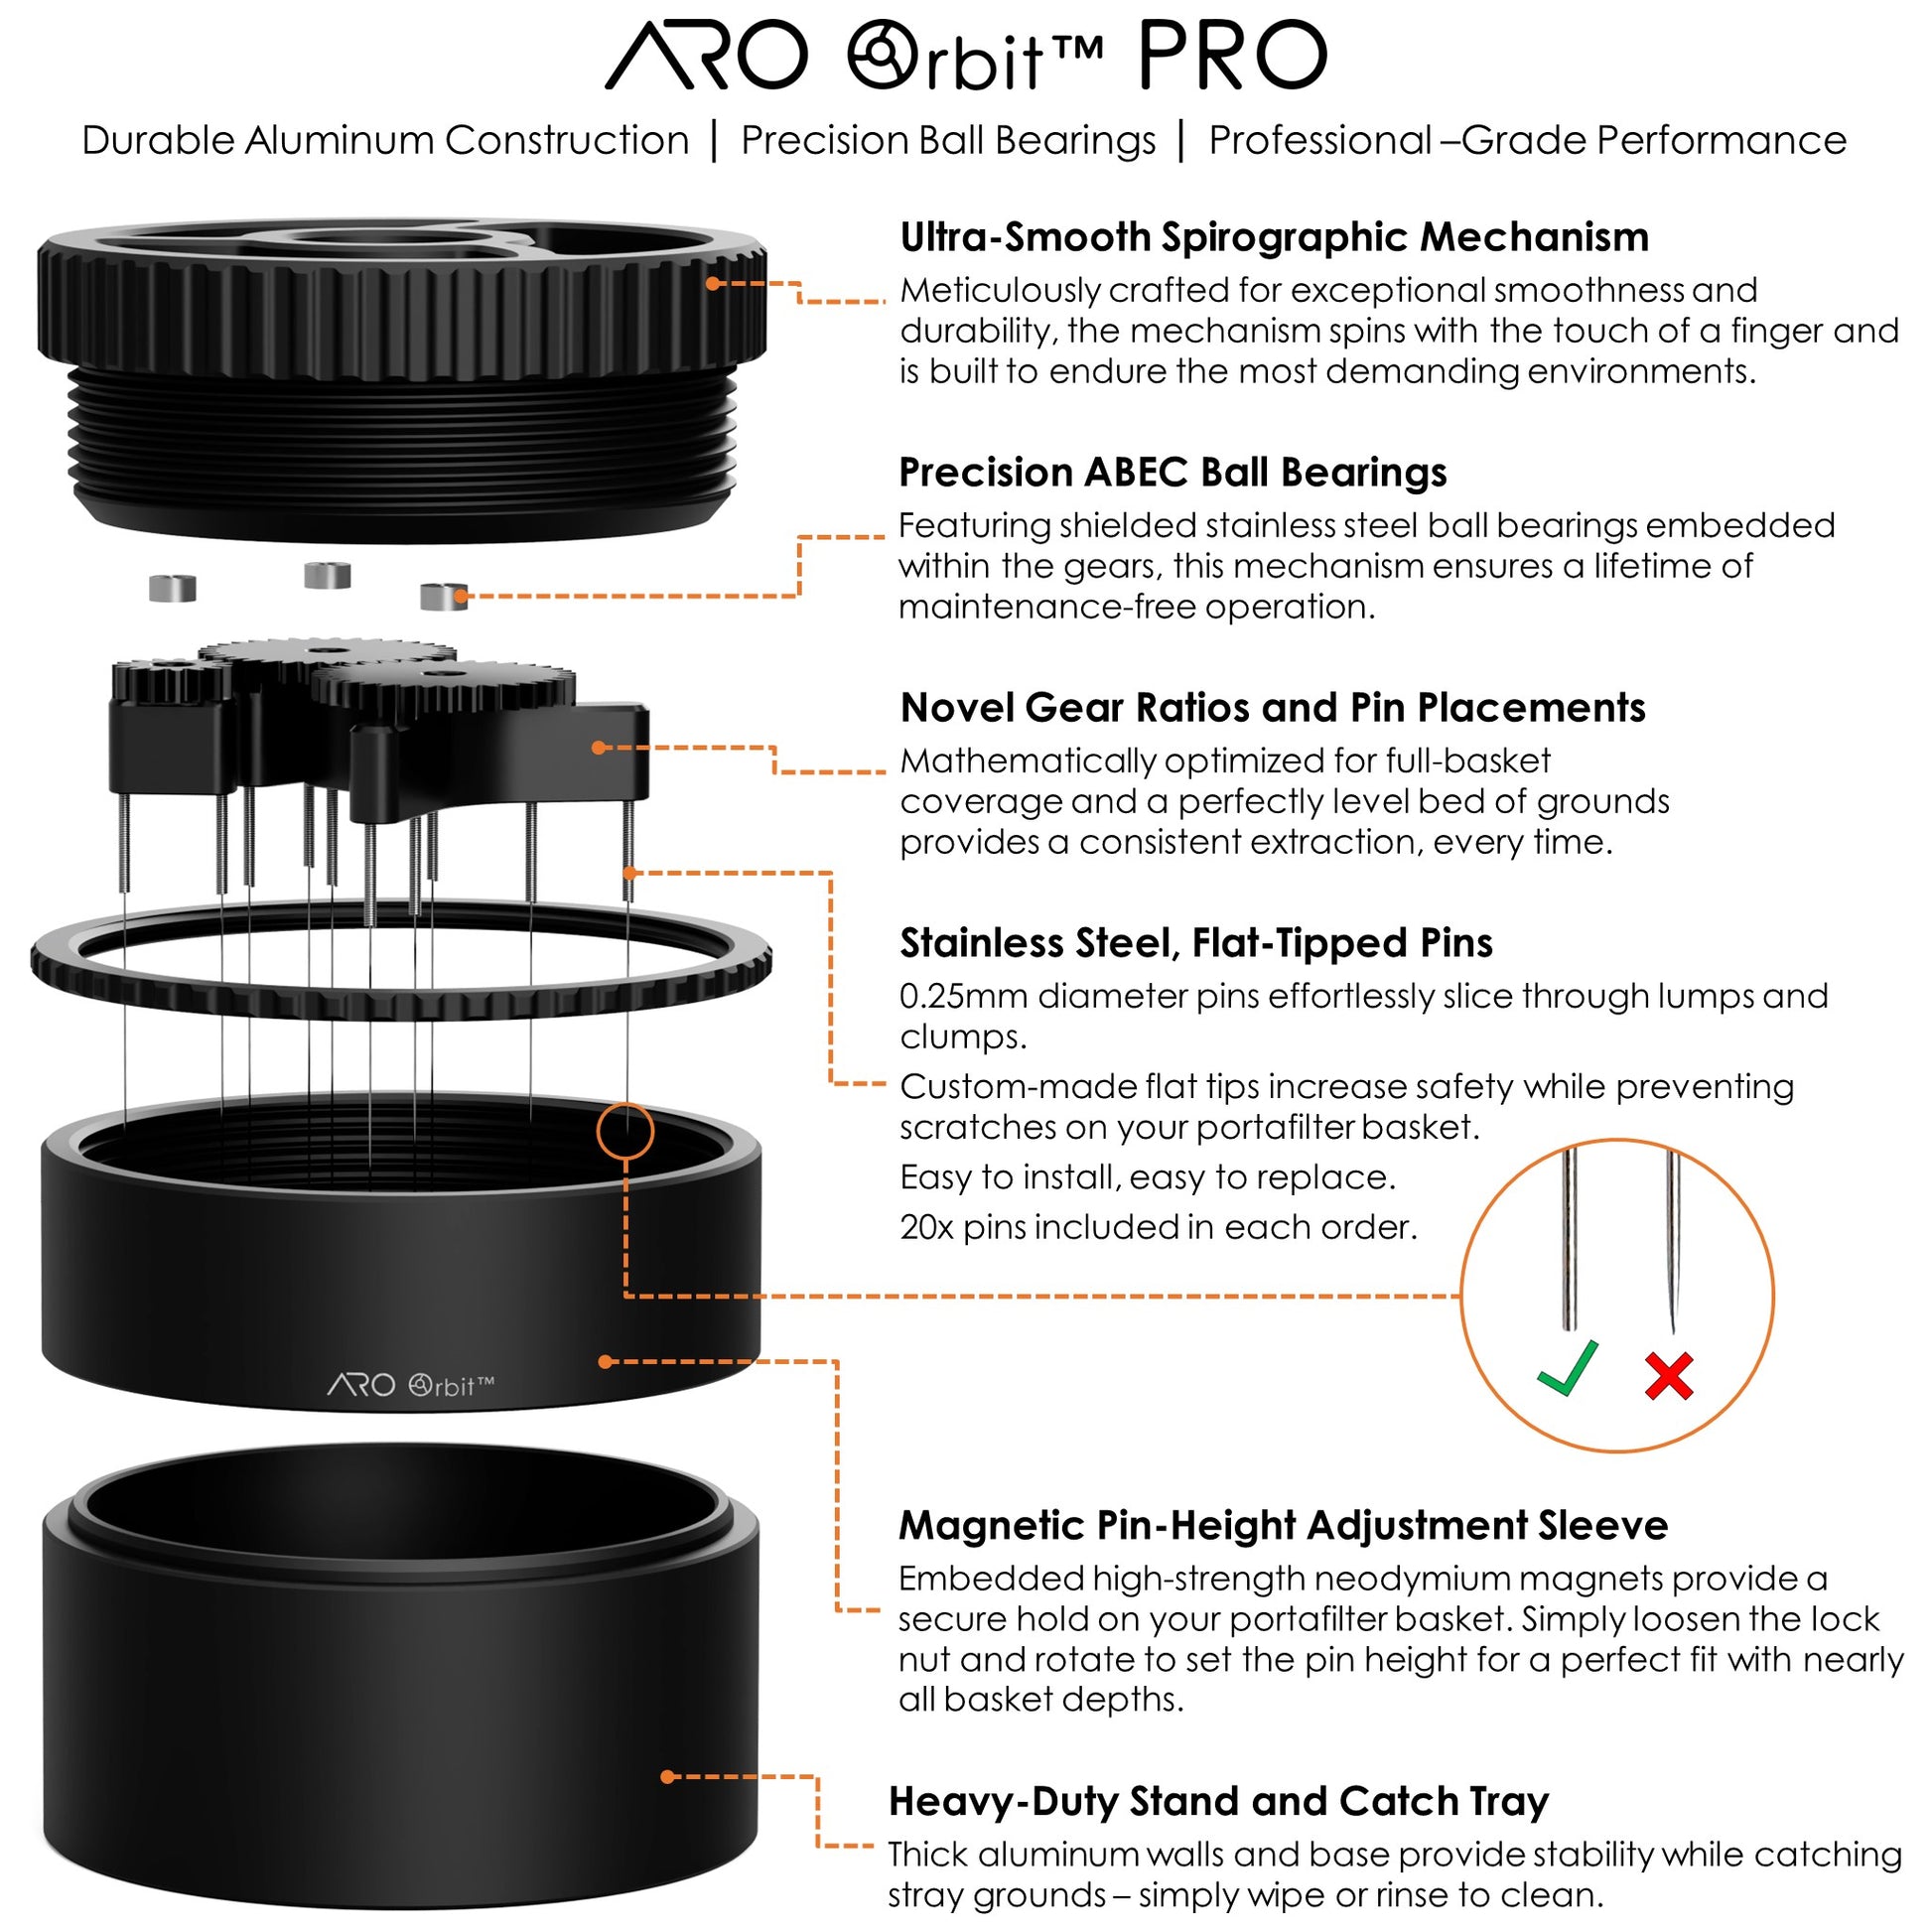 Exploded view of the ARO Orbit™ PRO, detailing its precision ball bearings, novel gear design, and durable aluminum construction.